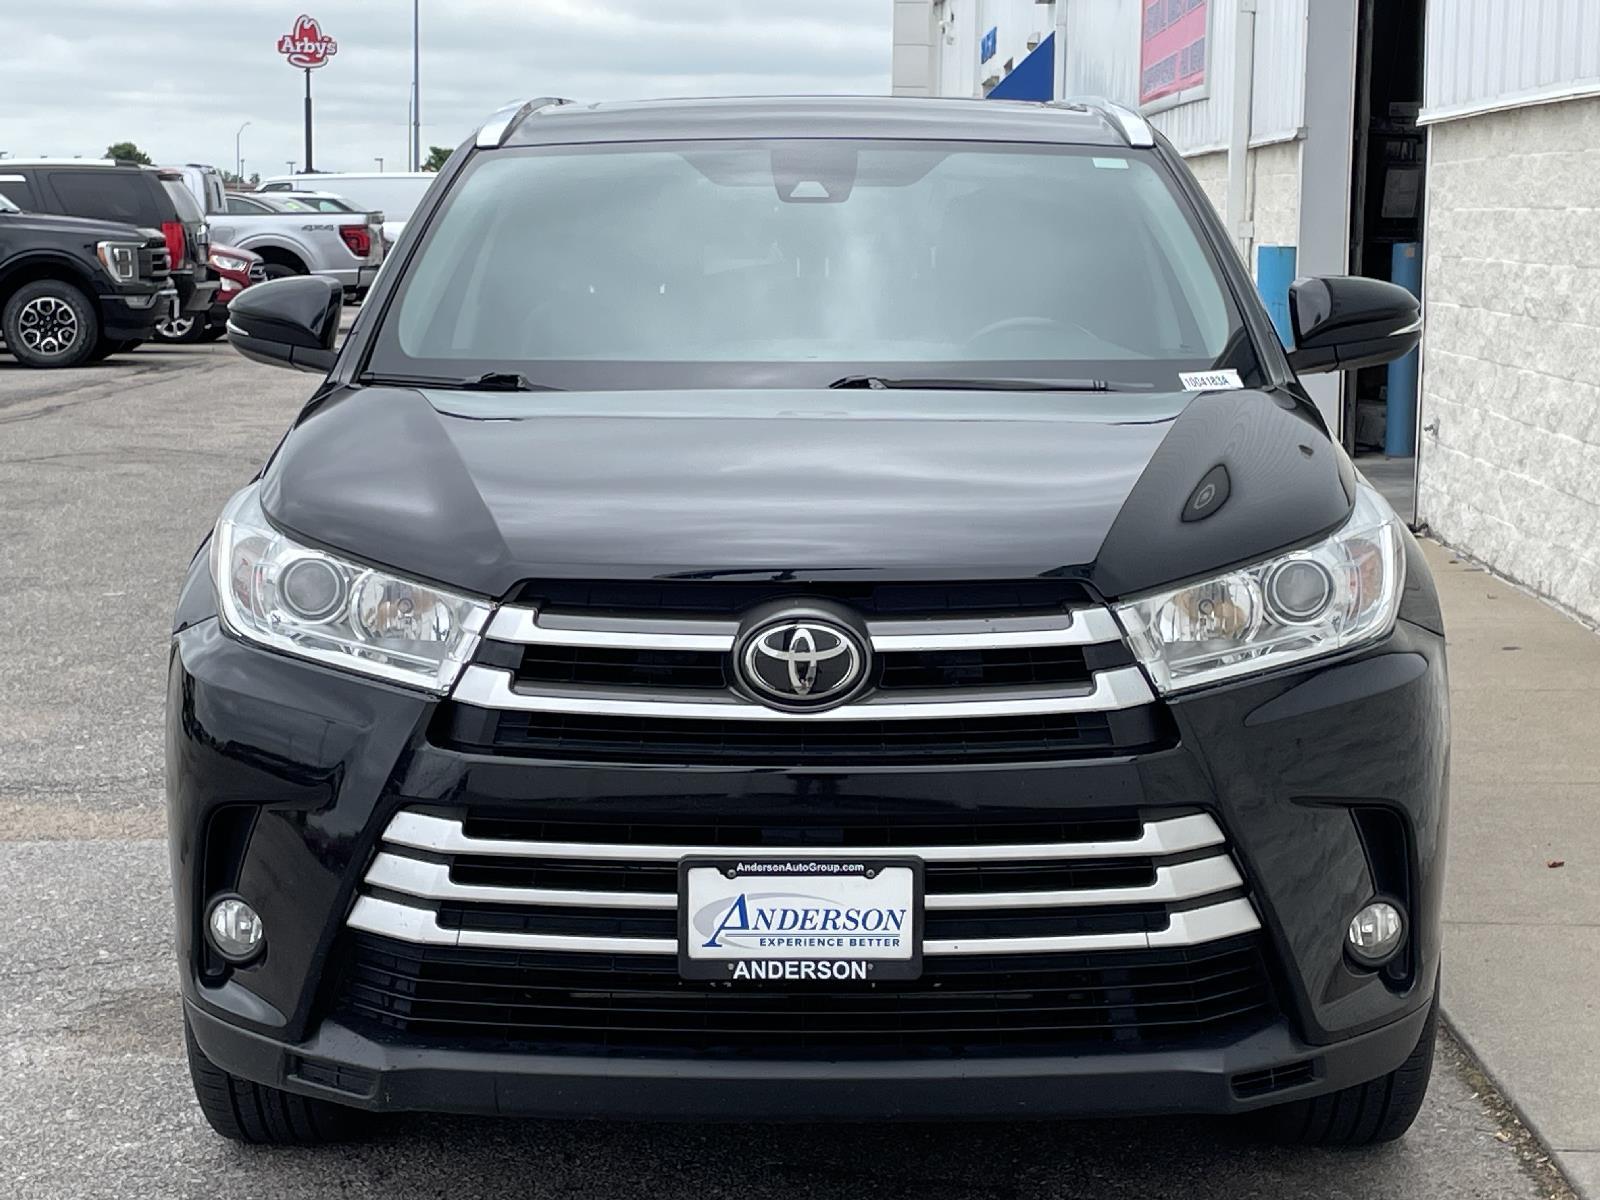 Used 2018 Toyota Highlander XLE SUV for sale in Lincoln NE